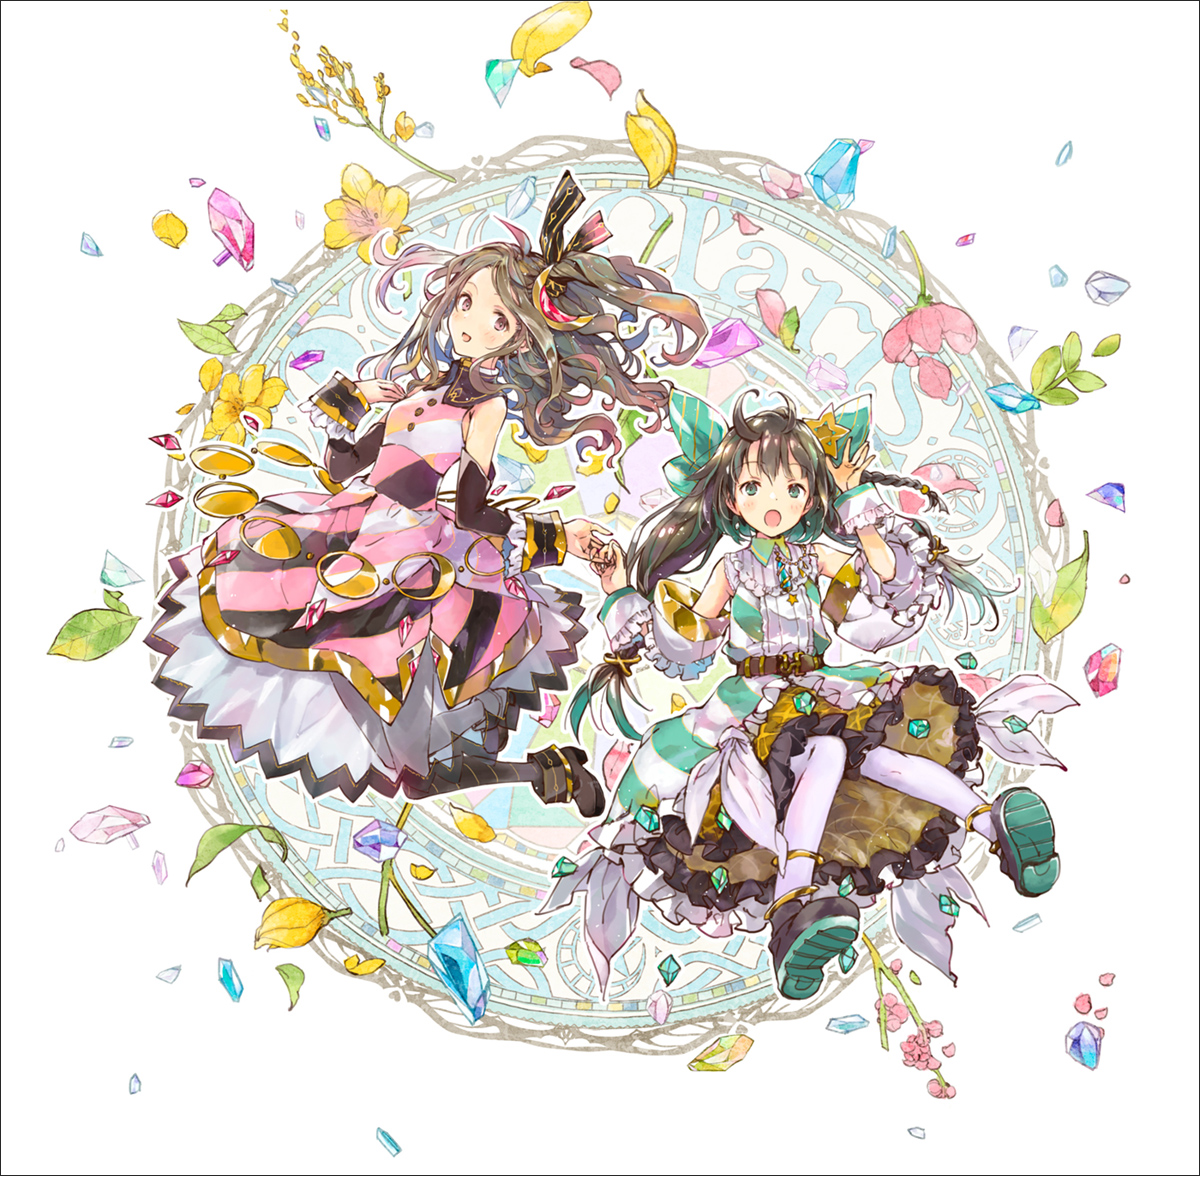 Cover for『ClariS - Shinsekai Venus』from the release『Parfaitone』